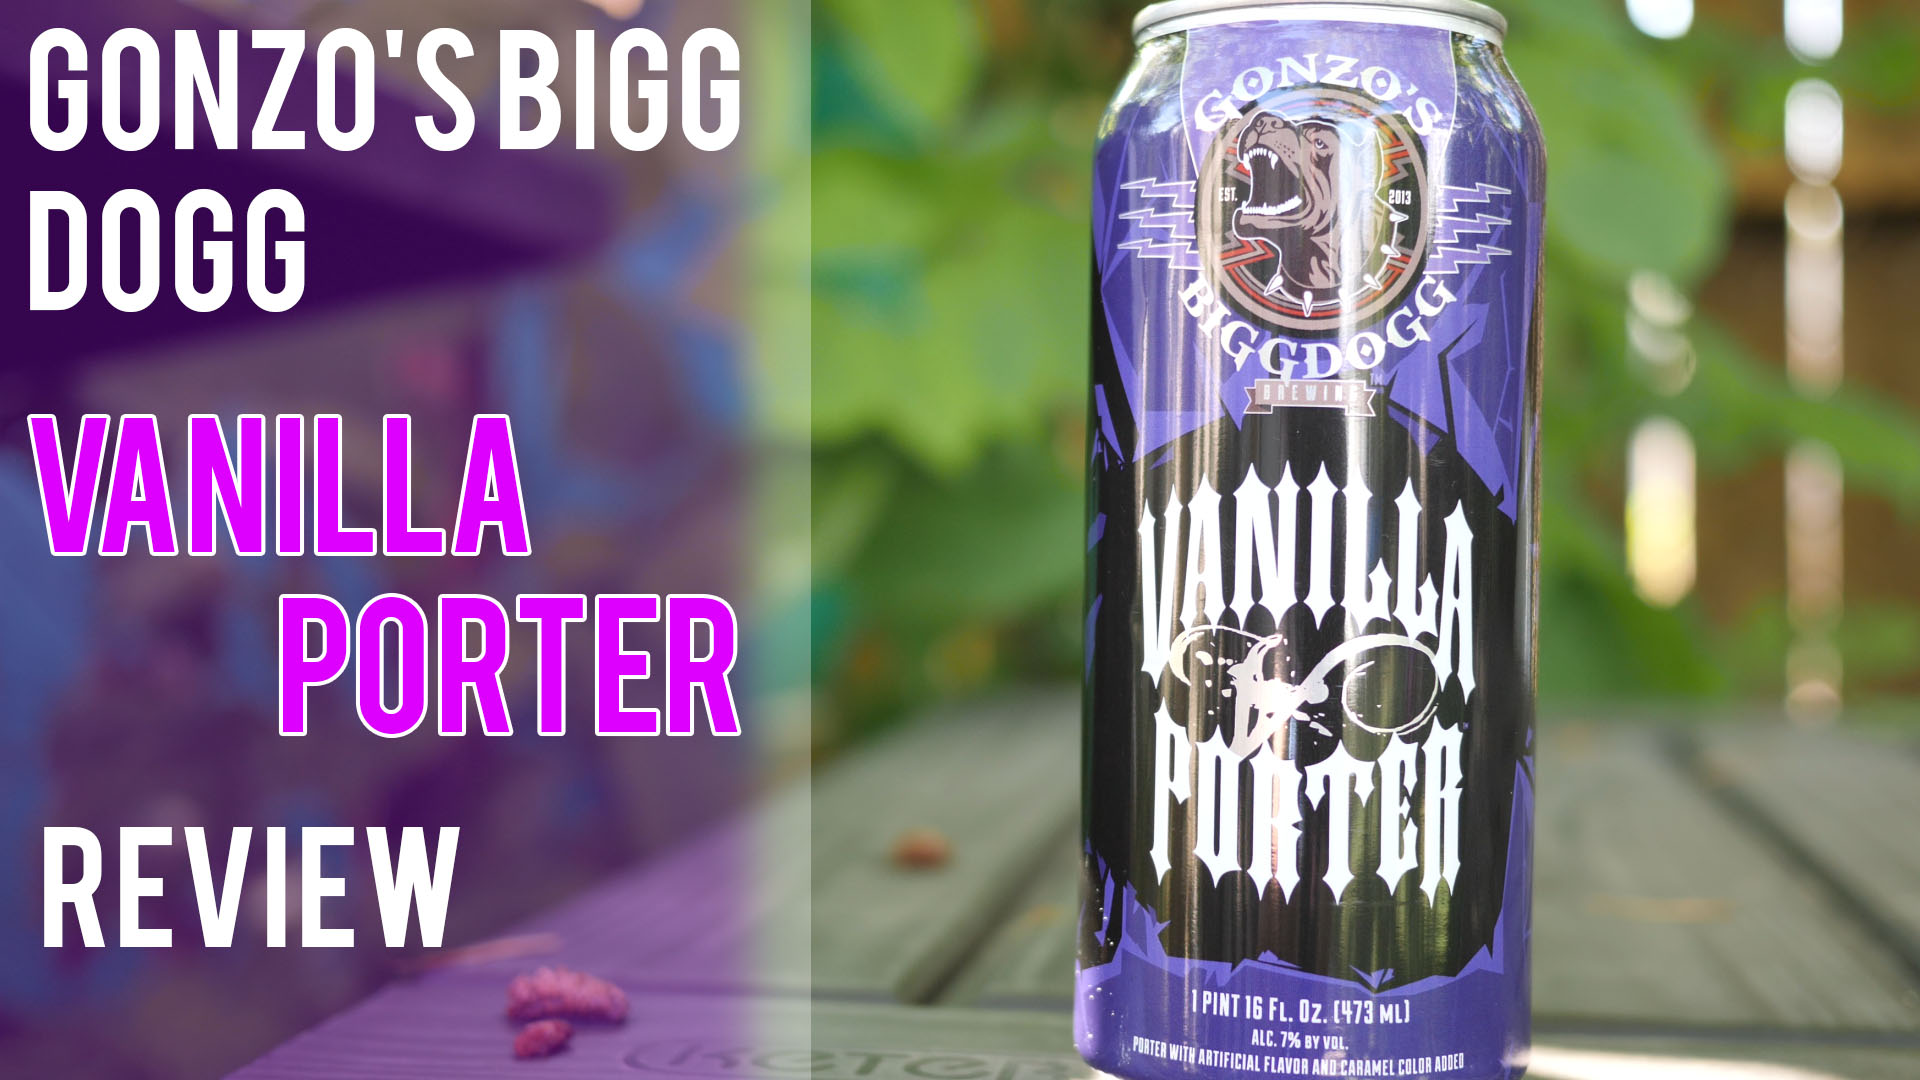 You are currently viewing Gonzo’s Bigg Dogg Vanilla Porter Review